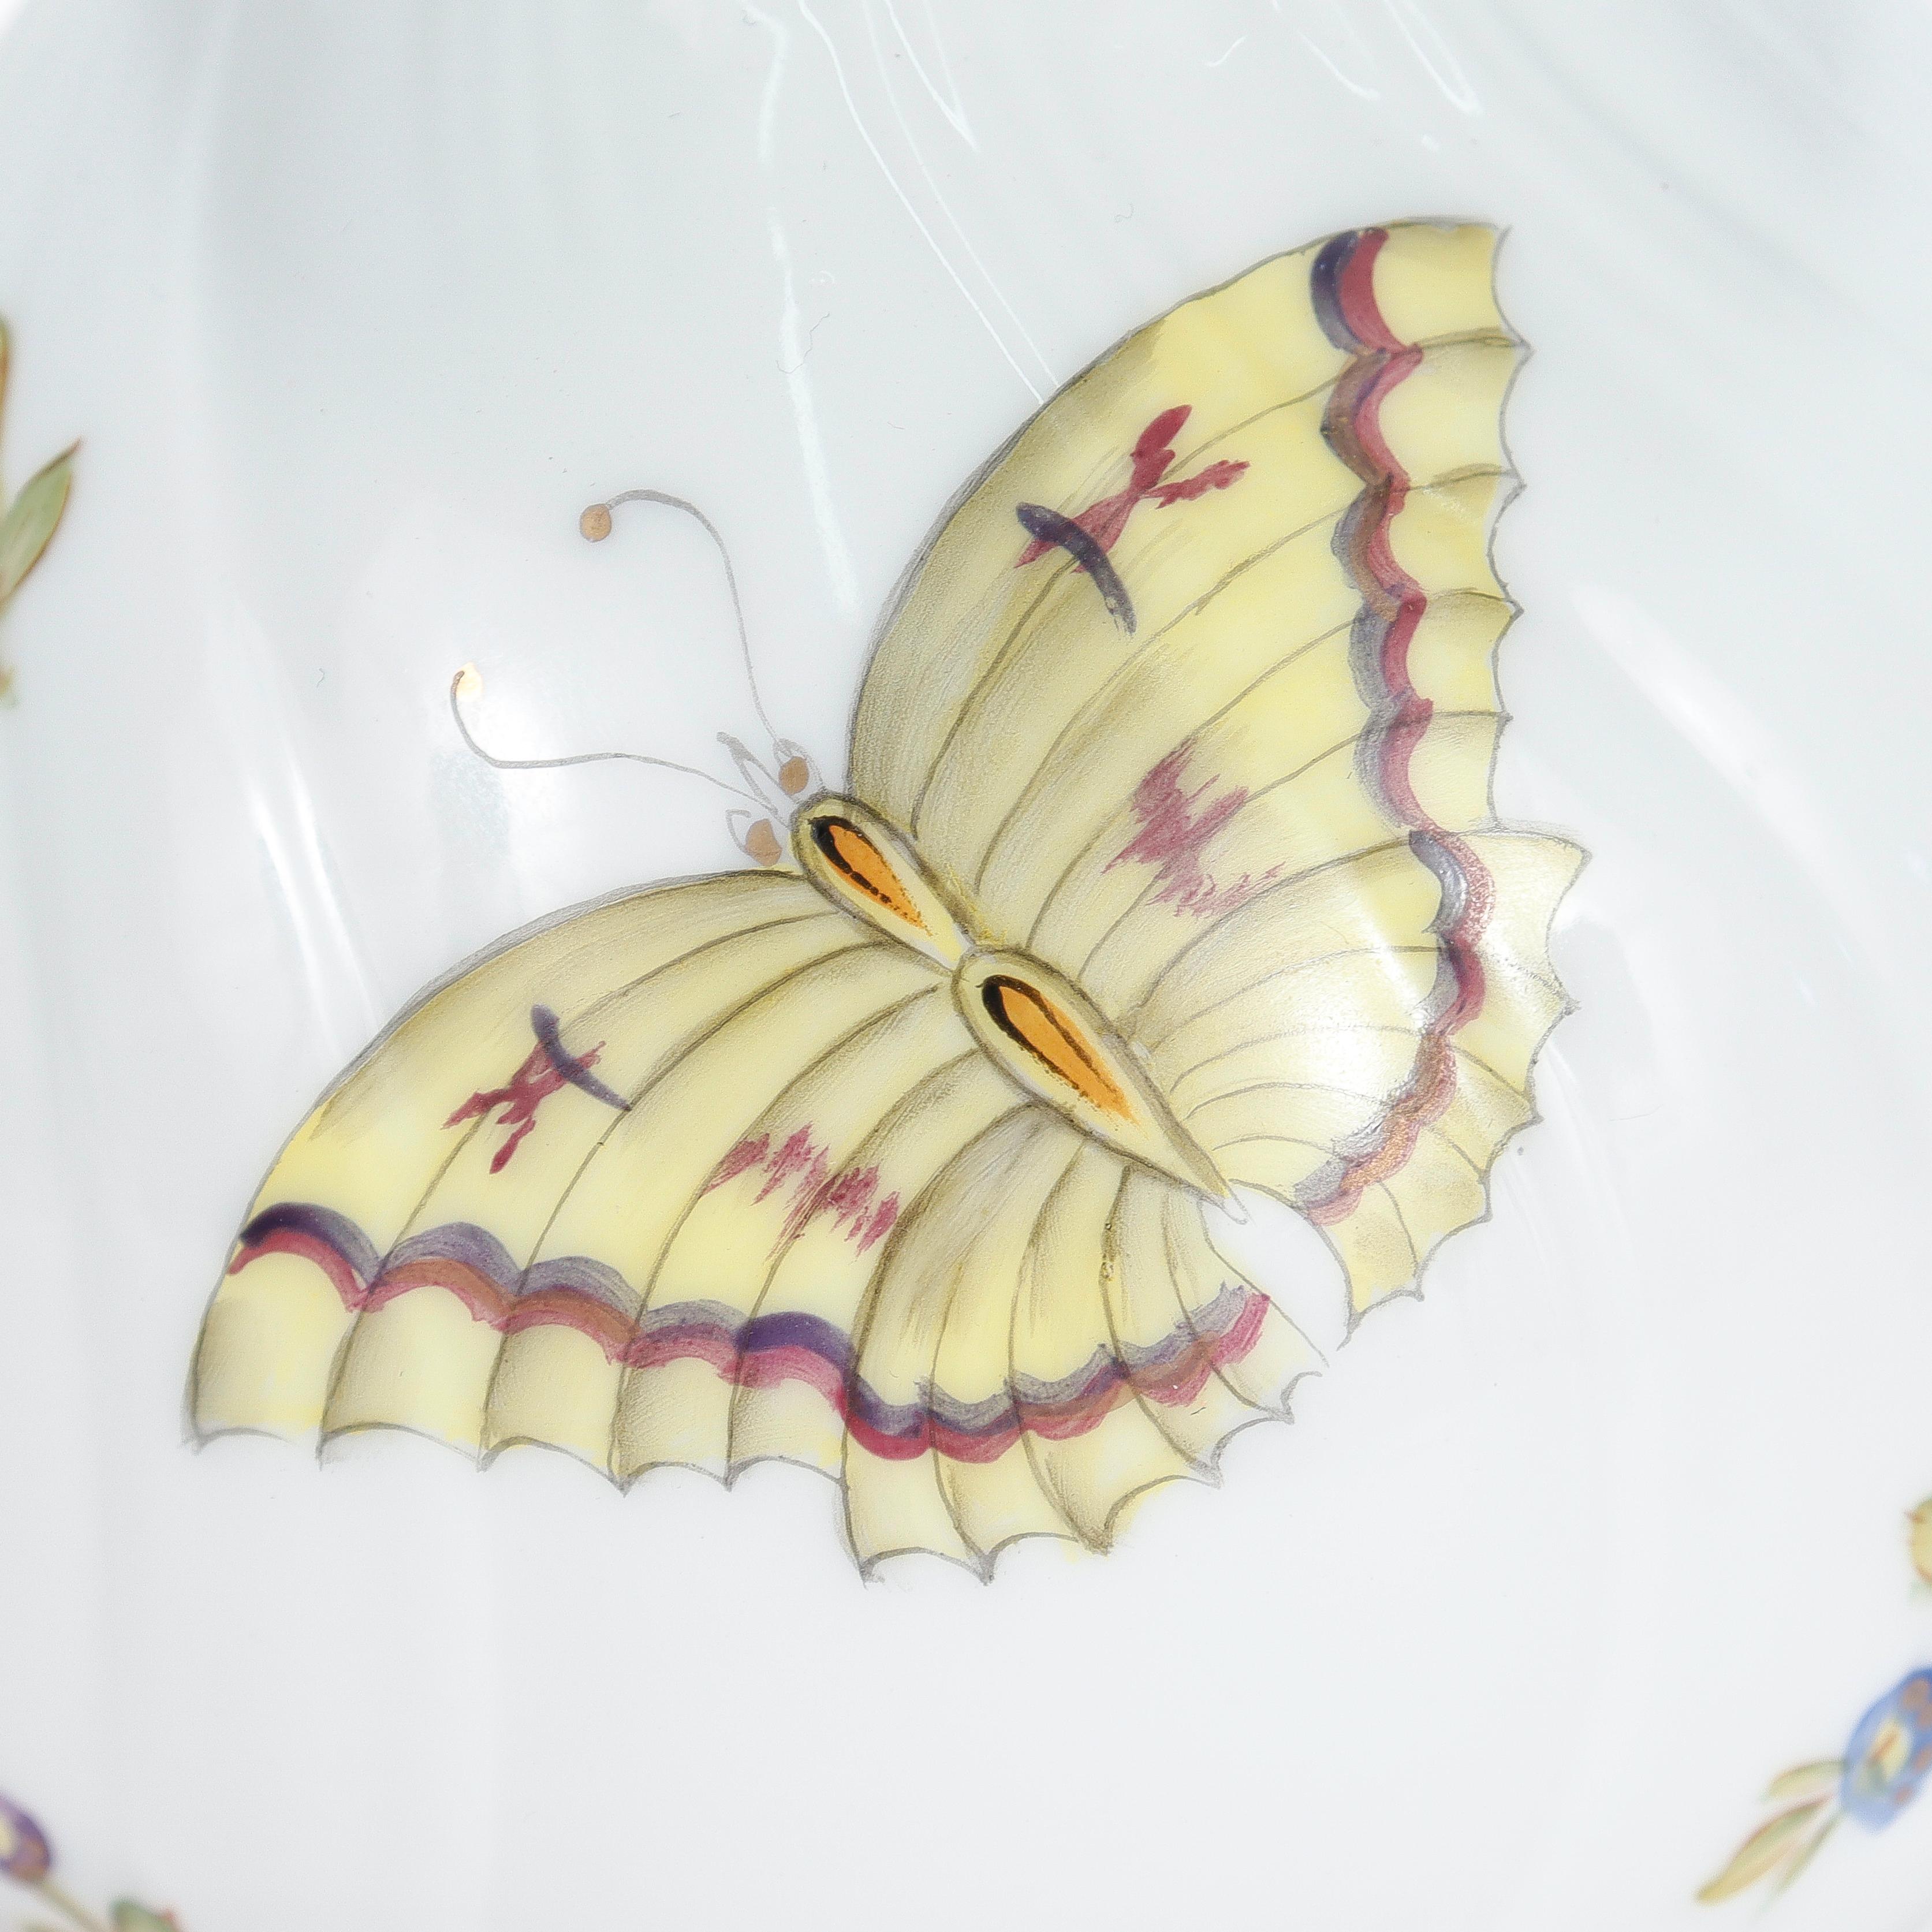 Hand-Painted Anna Weatherley Handpainted Budapest Spring Butterfly & Dragonfly Porcelain Vase